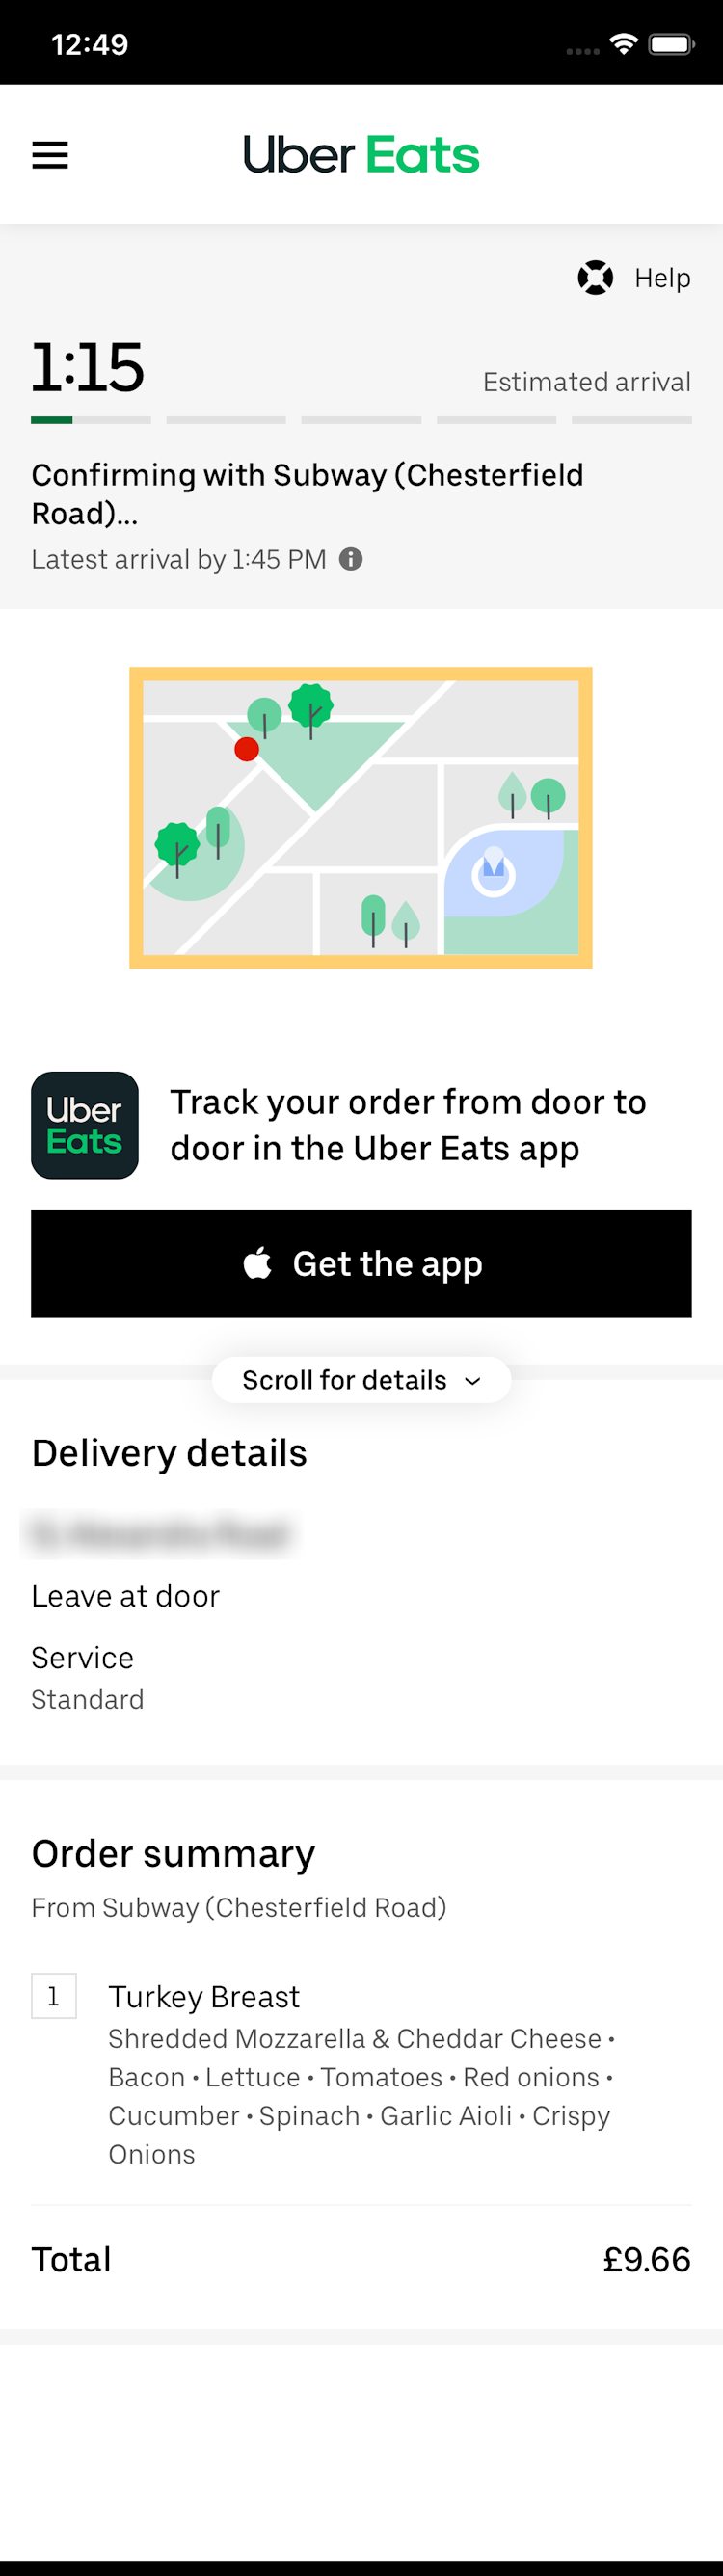 How To See Uber Eats Receipts